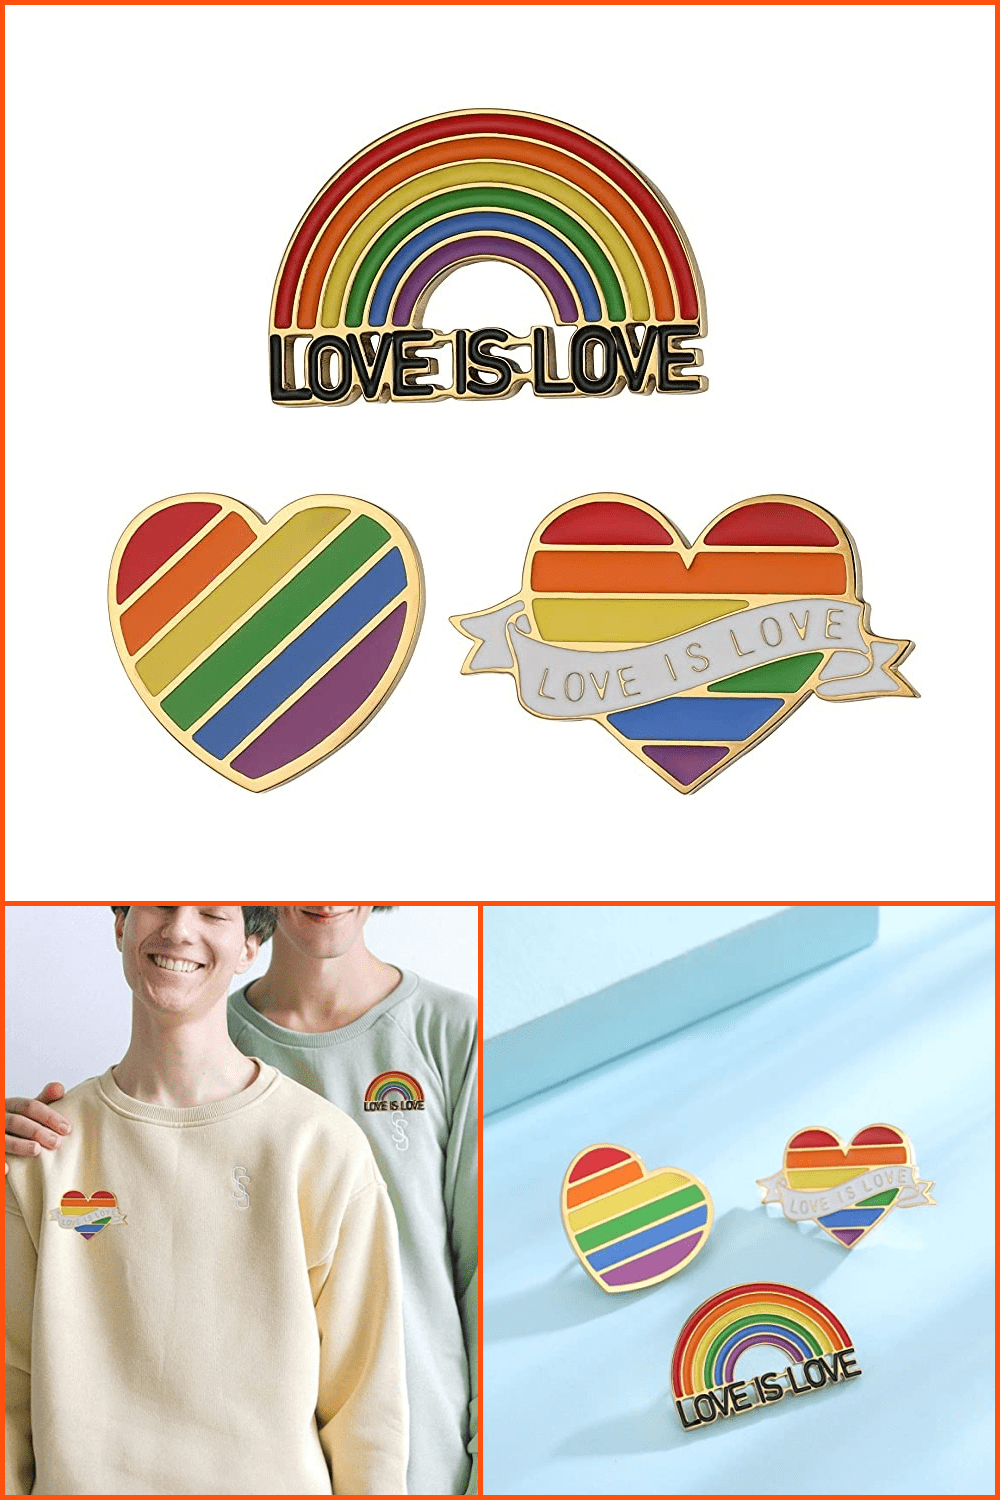 Heart and rainbow pins in rainbow color.